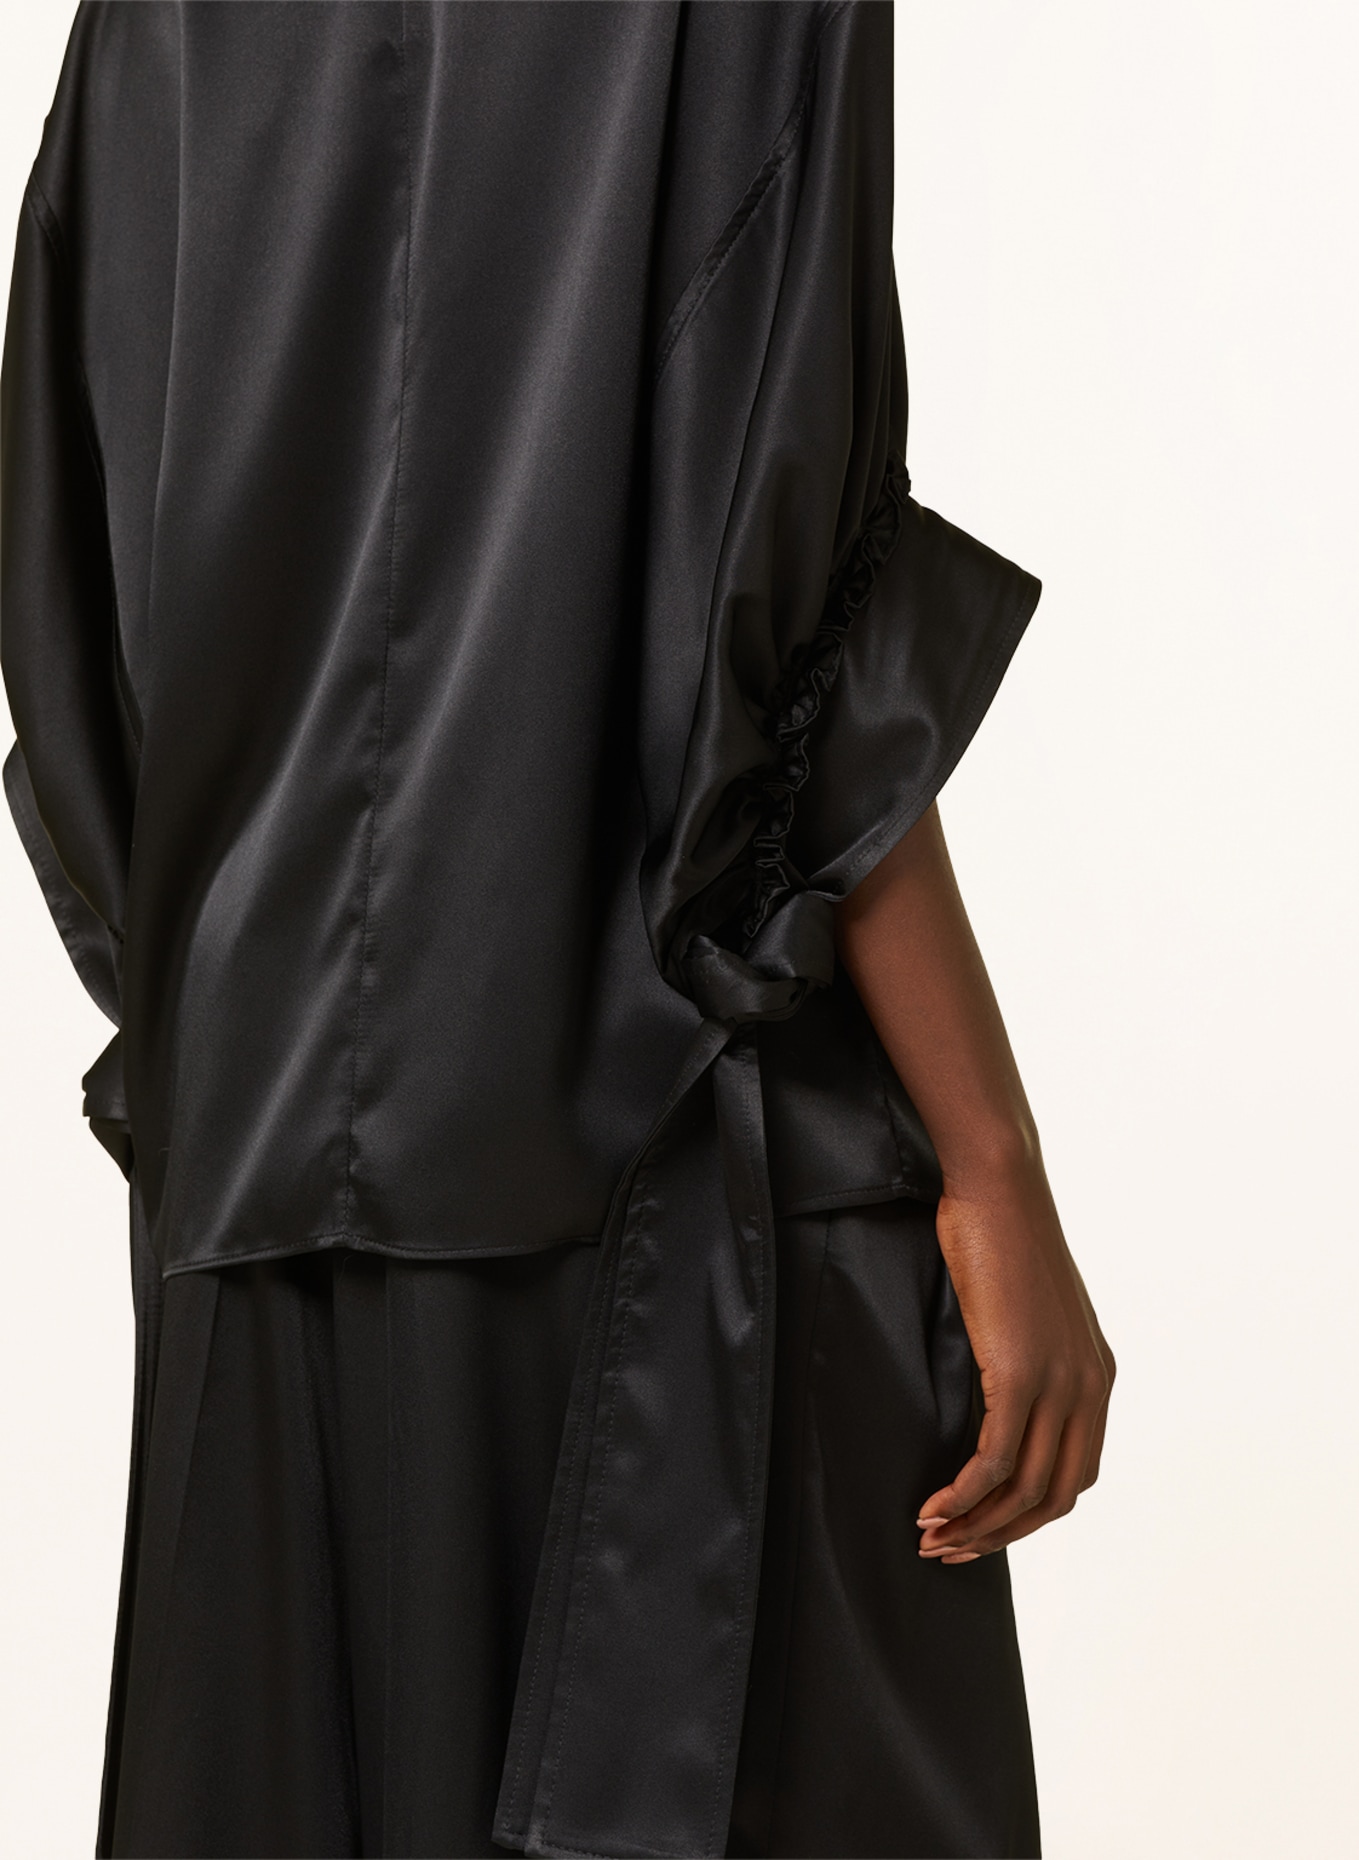 JW ANDERSON Shirt blouse made of satin with 3/4 sleeves, Color: BLACK (Image 4)